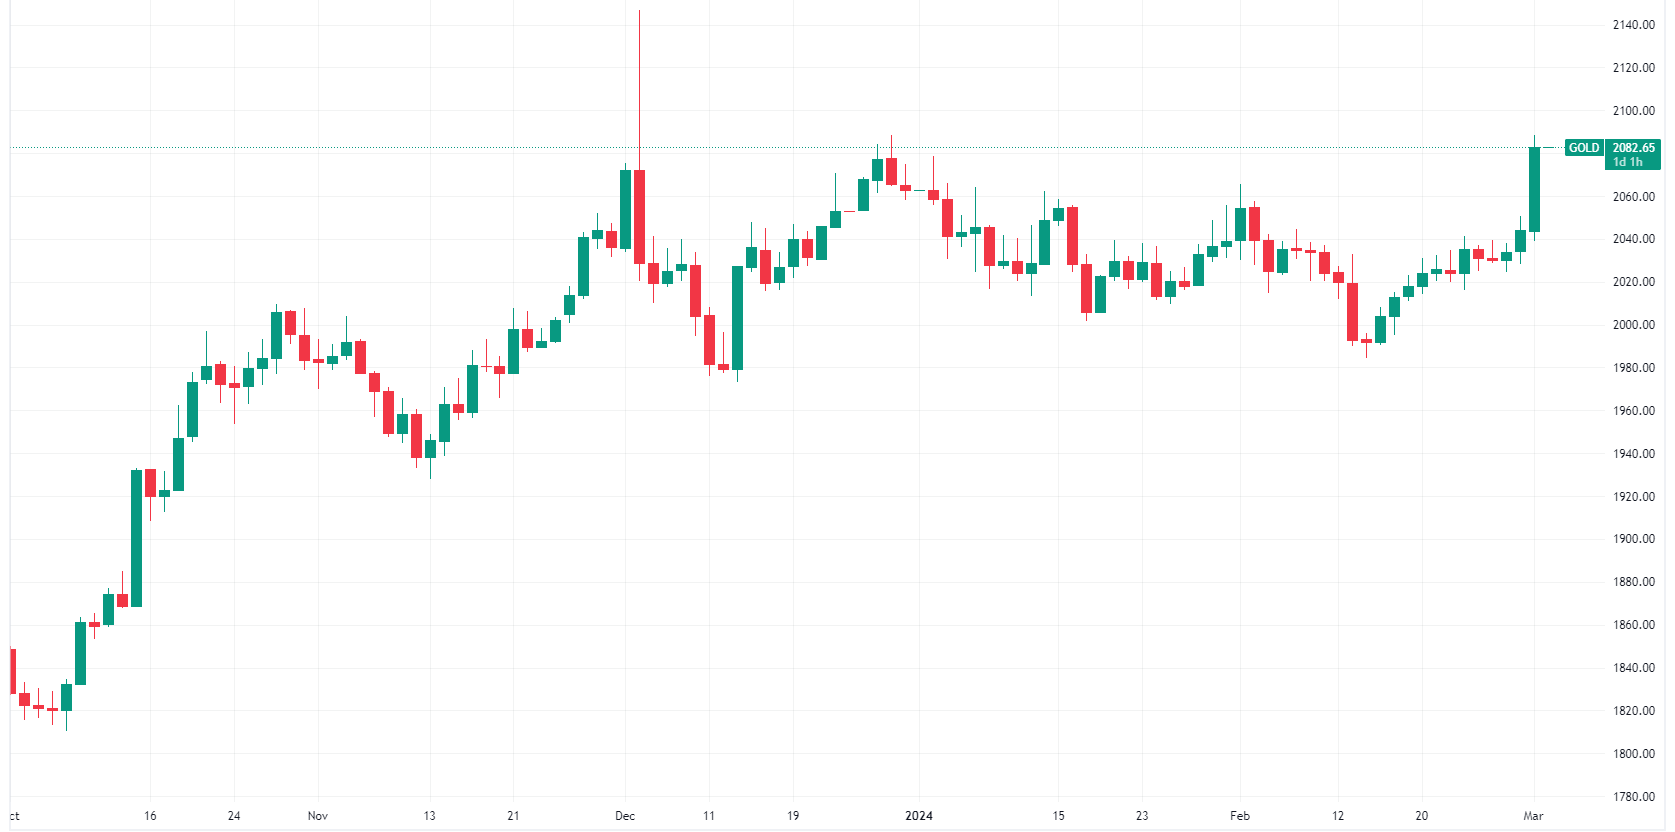 Gold spot price daily chart (Source: TradingView)